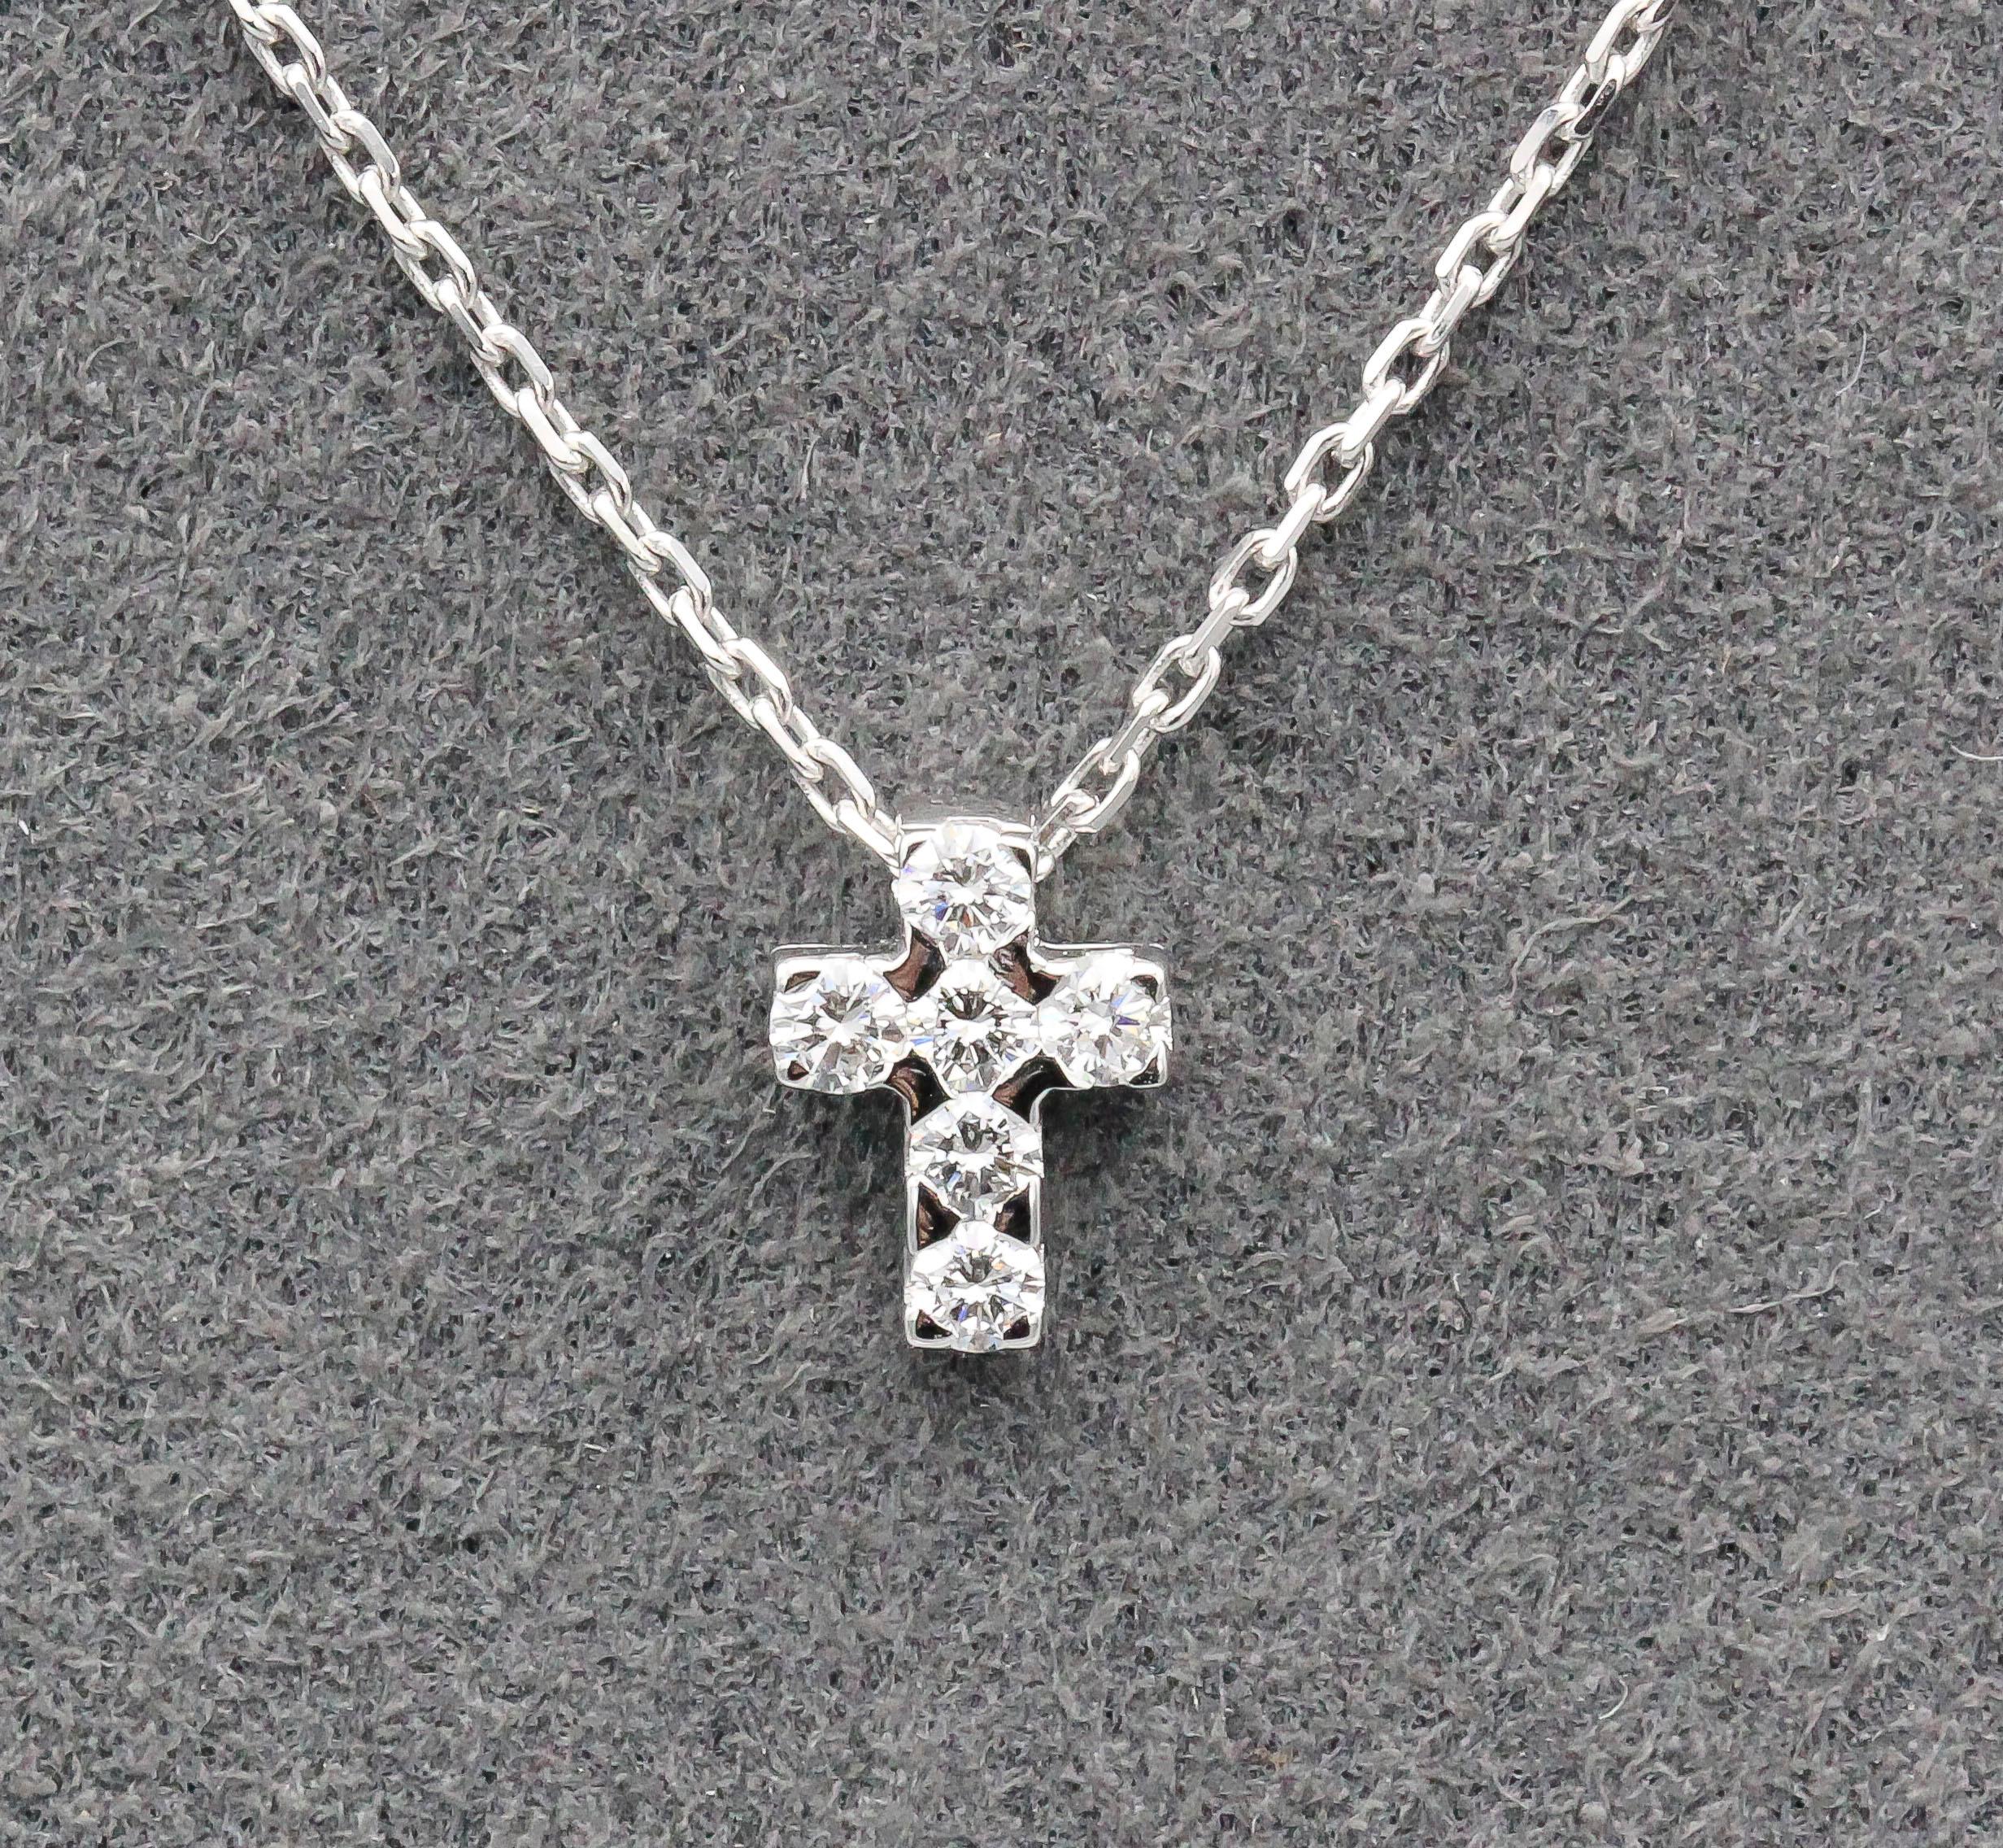 Fine diamond and 18K white gold cross pendant necklace by Van Cleef & Arpels. It is petite in size and unassuming, featuring high quality round diamonds.  Well made and easy to wear, a very fine gift idea.  Total length - 18